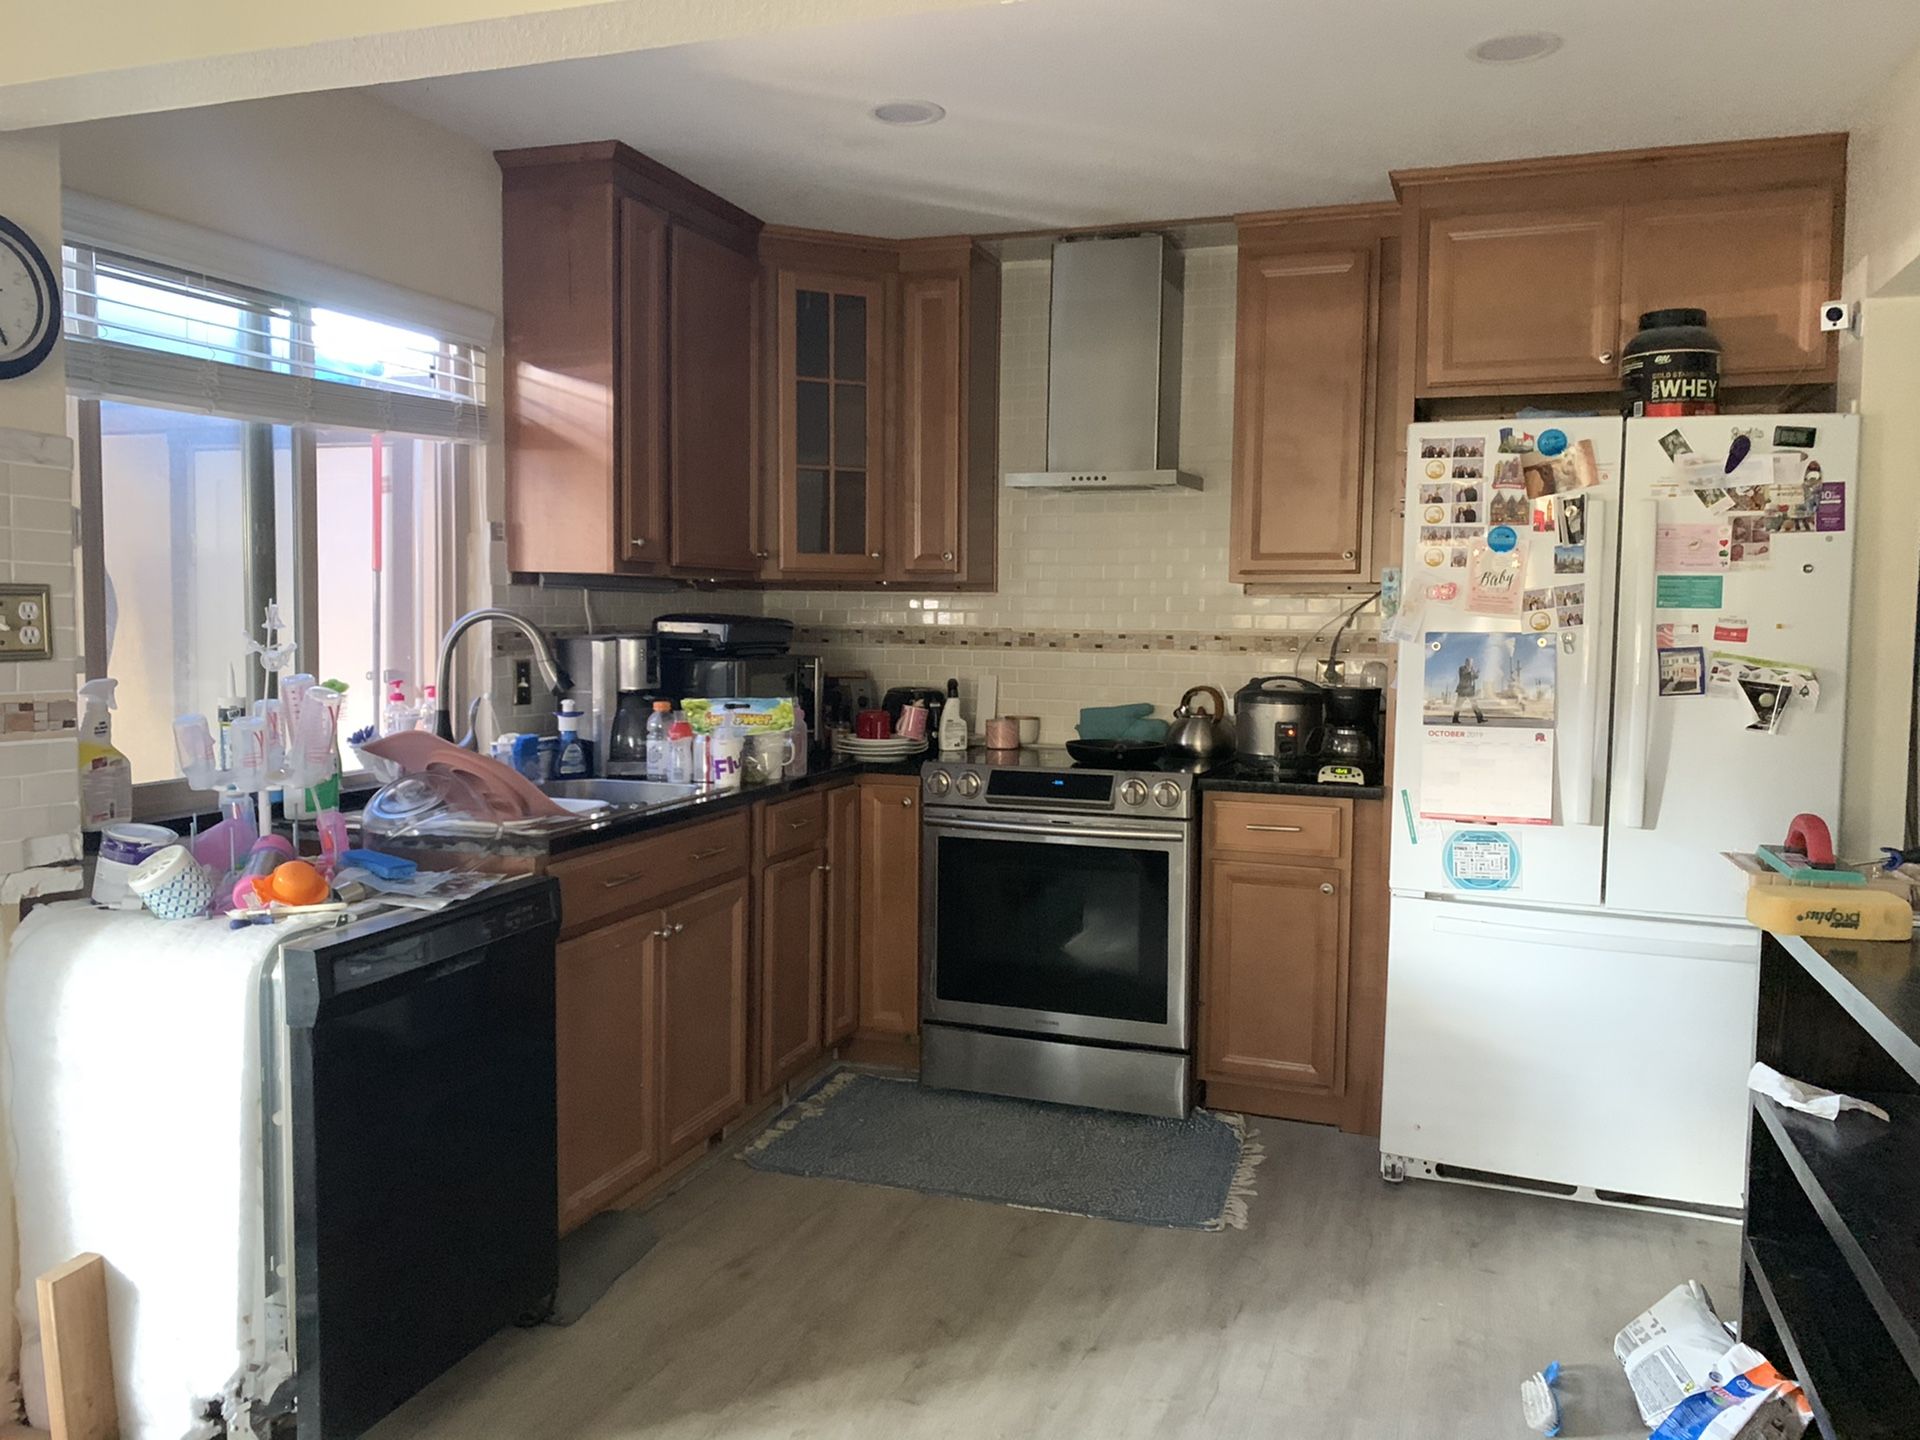 Very beautiful maple kitchen cabinets, still in great condition. Selling it all for $800. All you need to do is pick them up. It will come with a wh